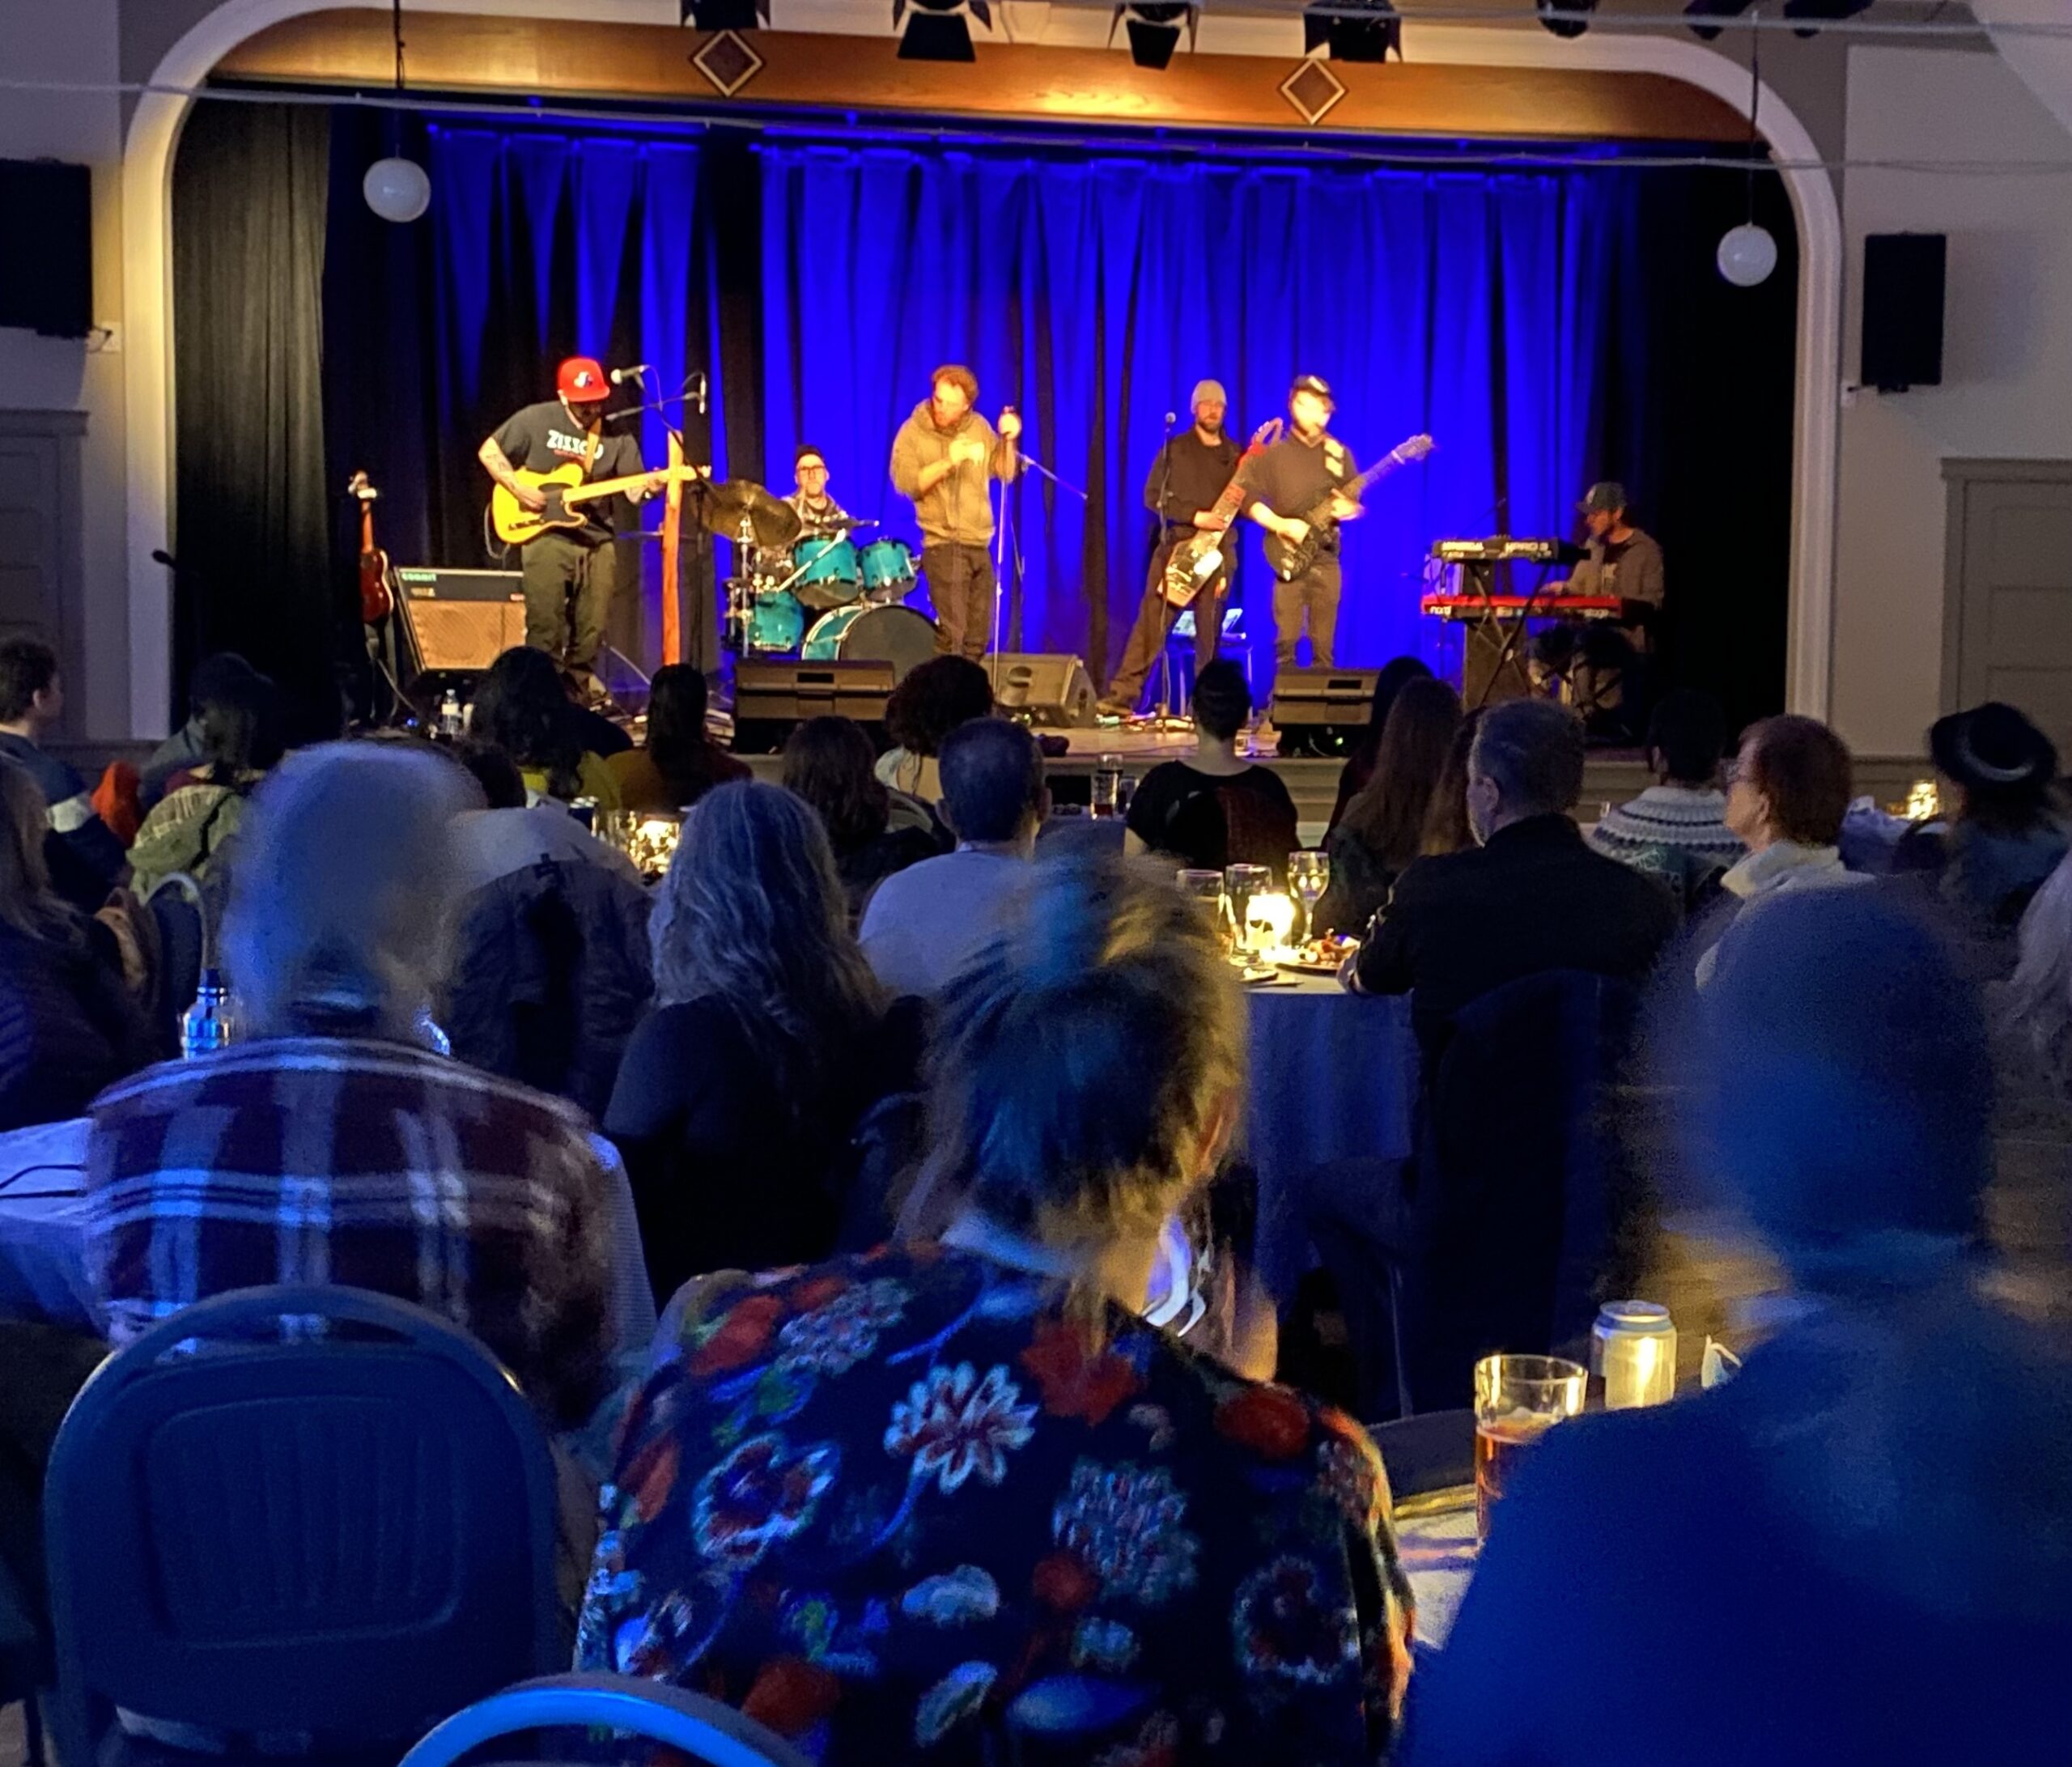 Small Hall Crawl Music Series: The Small Hall Crawl Music Series is an annual event presented by the Arts Council for the South Shuswap. It’s a series of live music concerts, hosted at local community […]